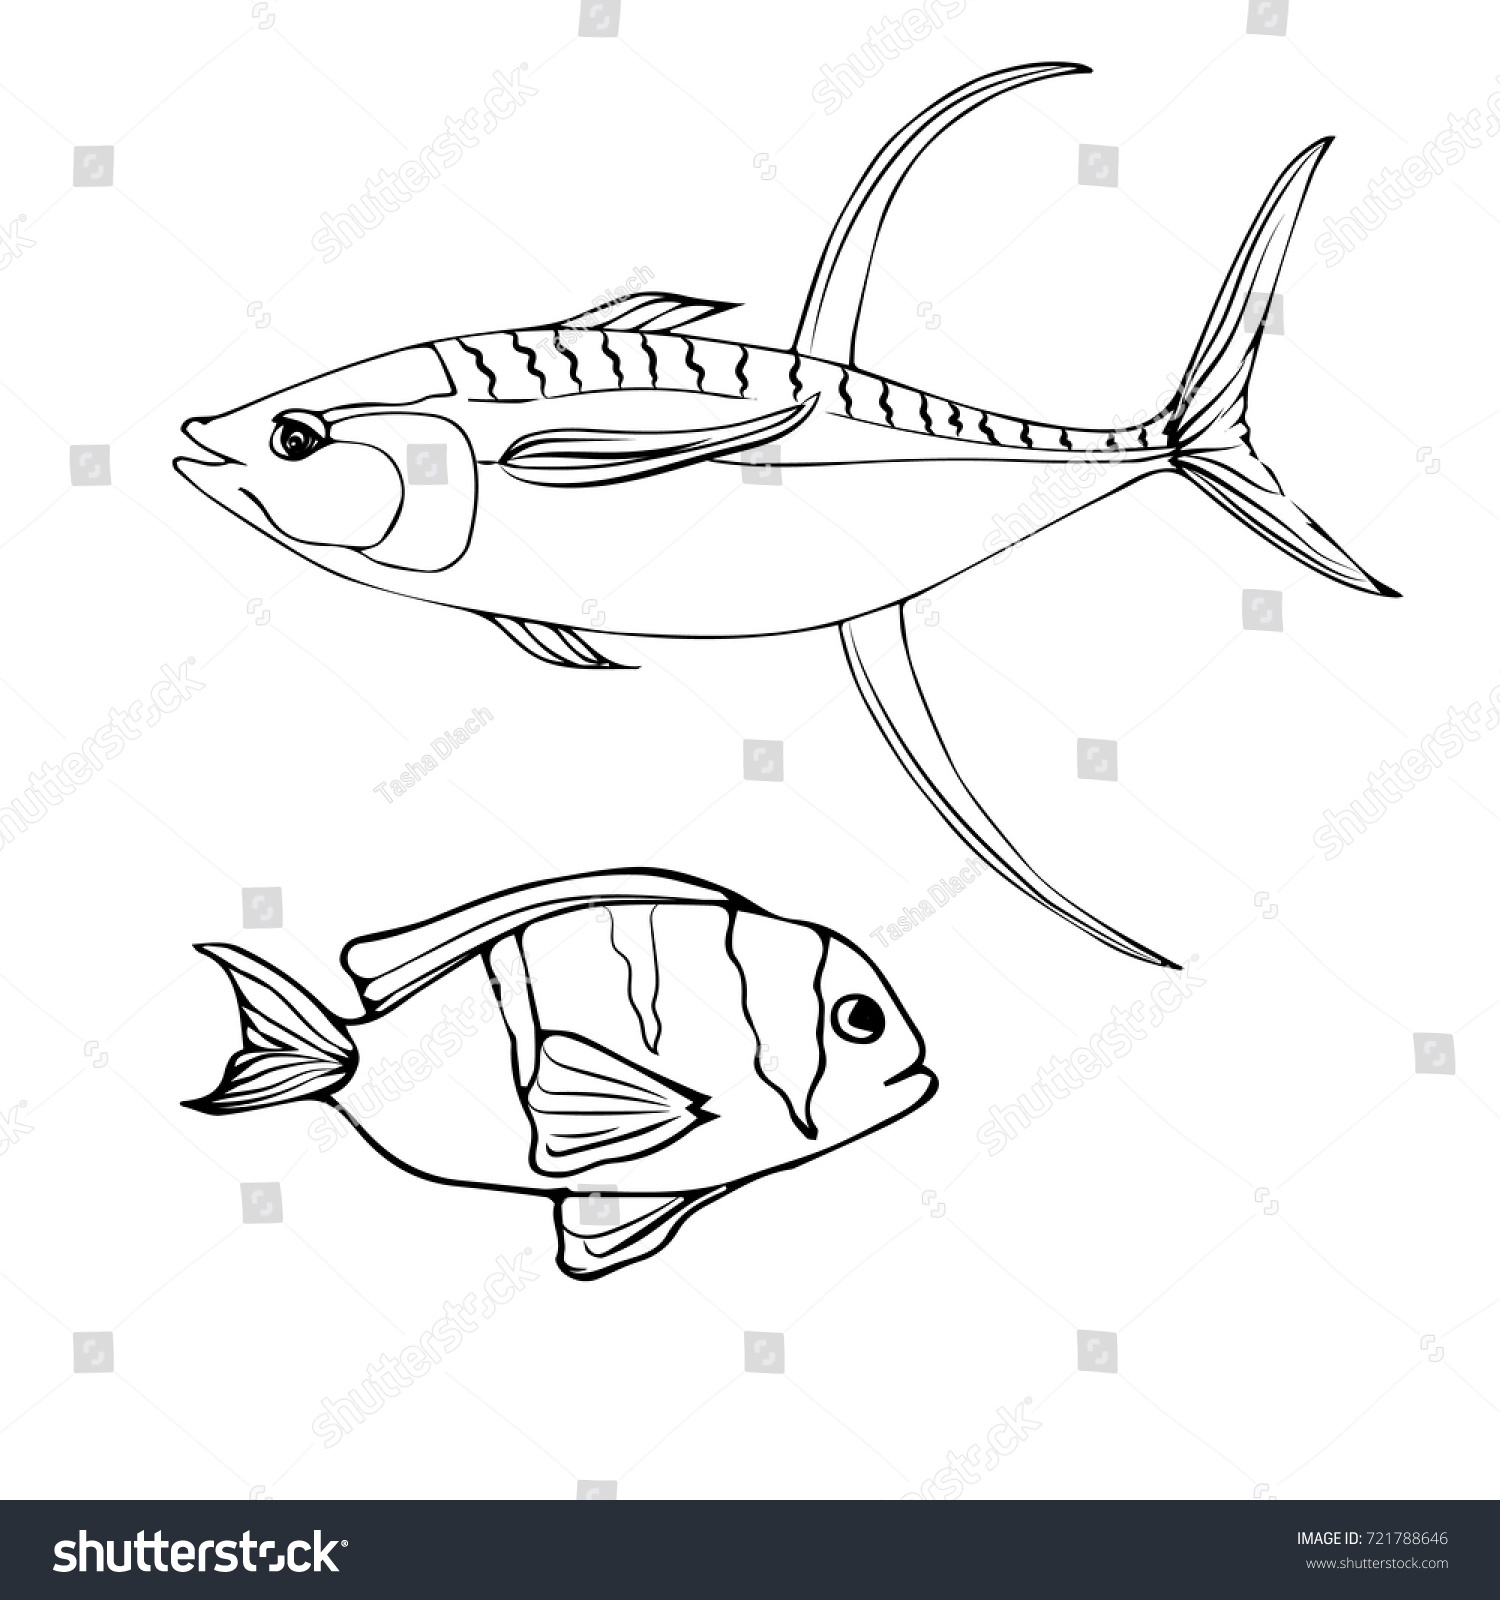 Fishing Abstract Vector Fish Sketch Fishes Stock Photo (Photo ...